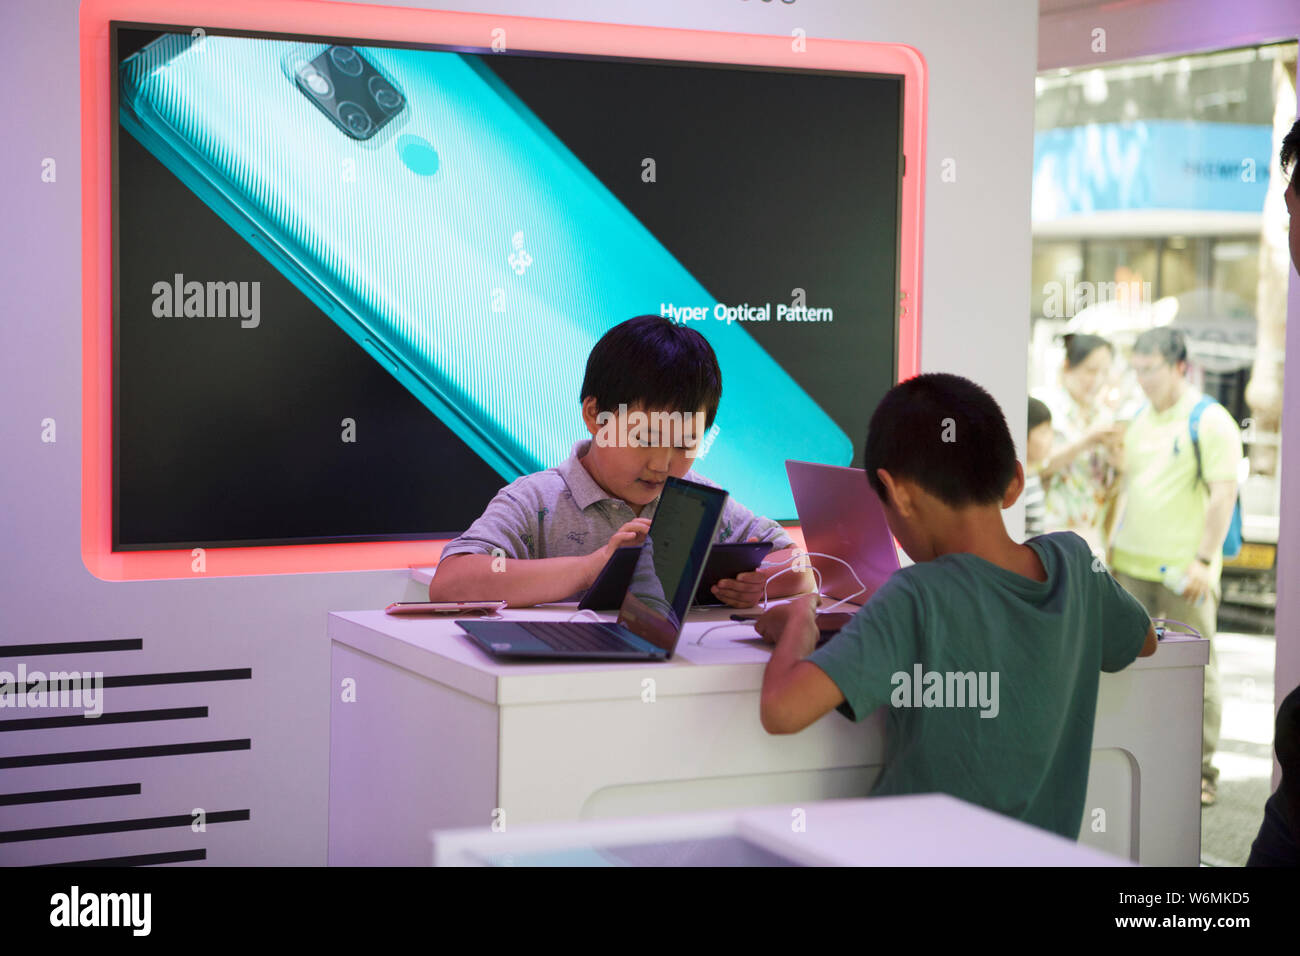 Huawei - 5g technology, 5g network, 2 Asian boys using 5g to play online games. Technology companies. Stock Photo